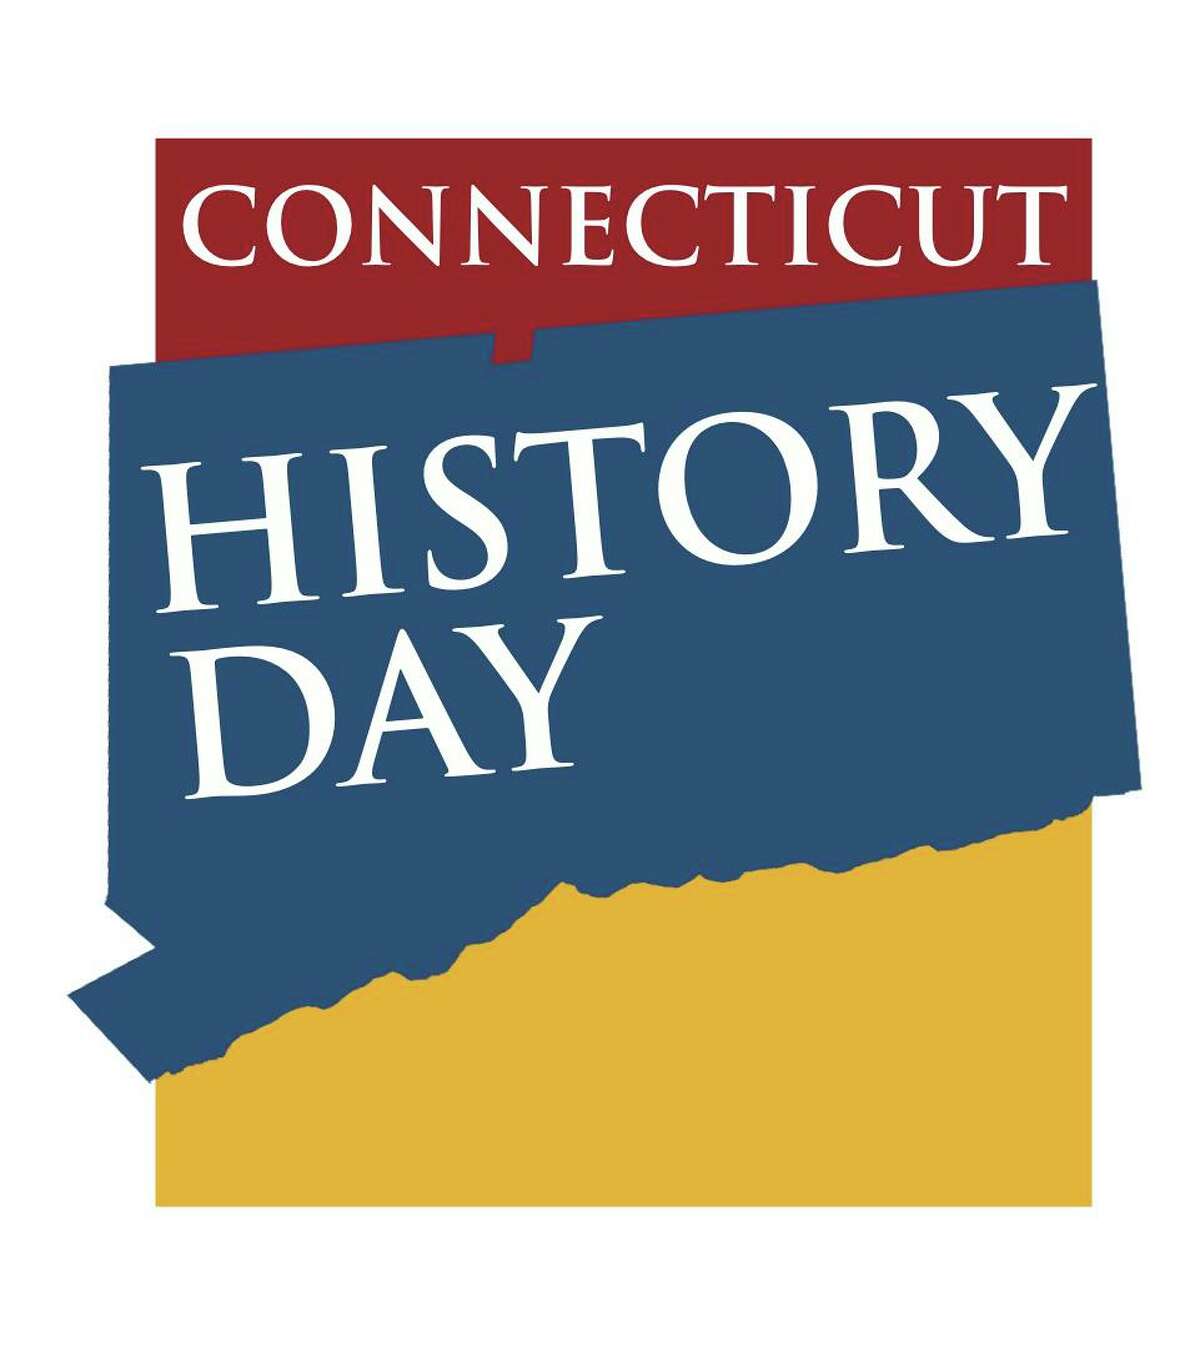 The Connecticut History Day logo.